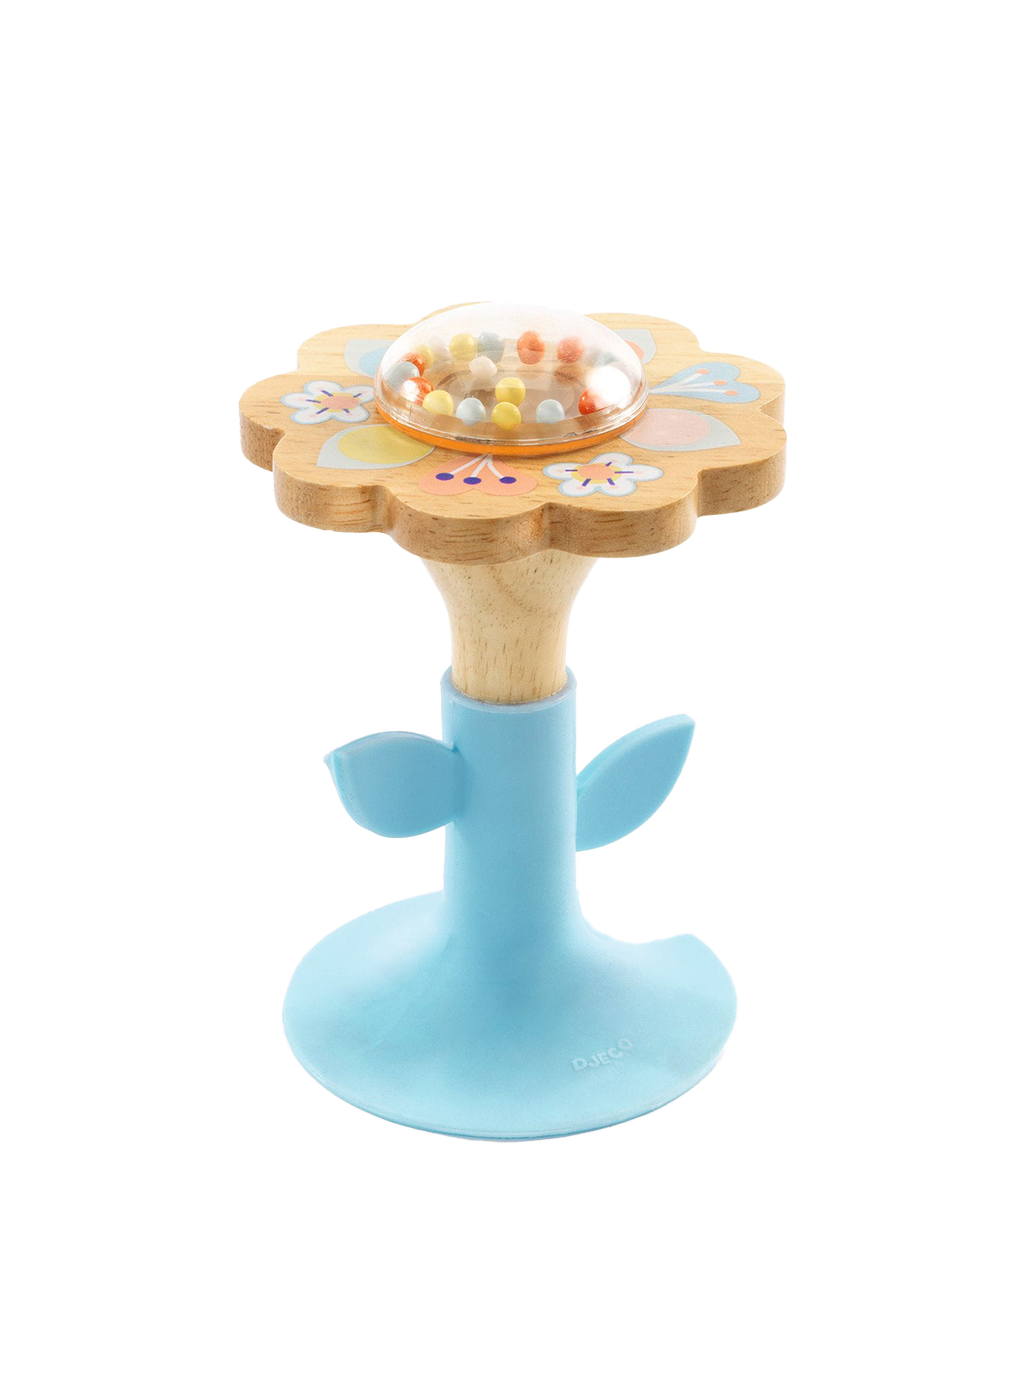 Swipi Flower Rattle flower rattle with suction cup